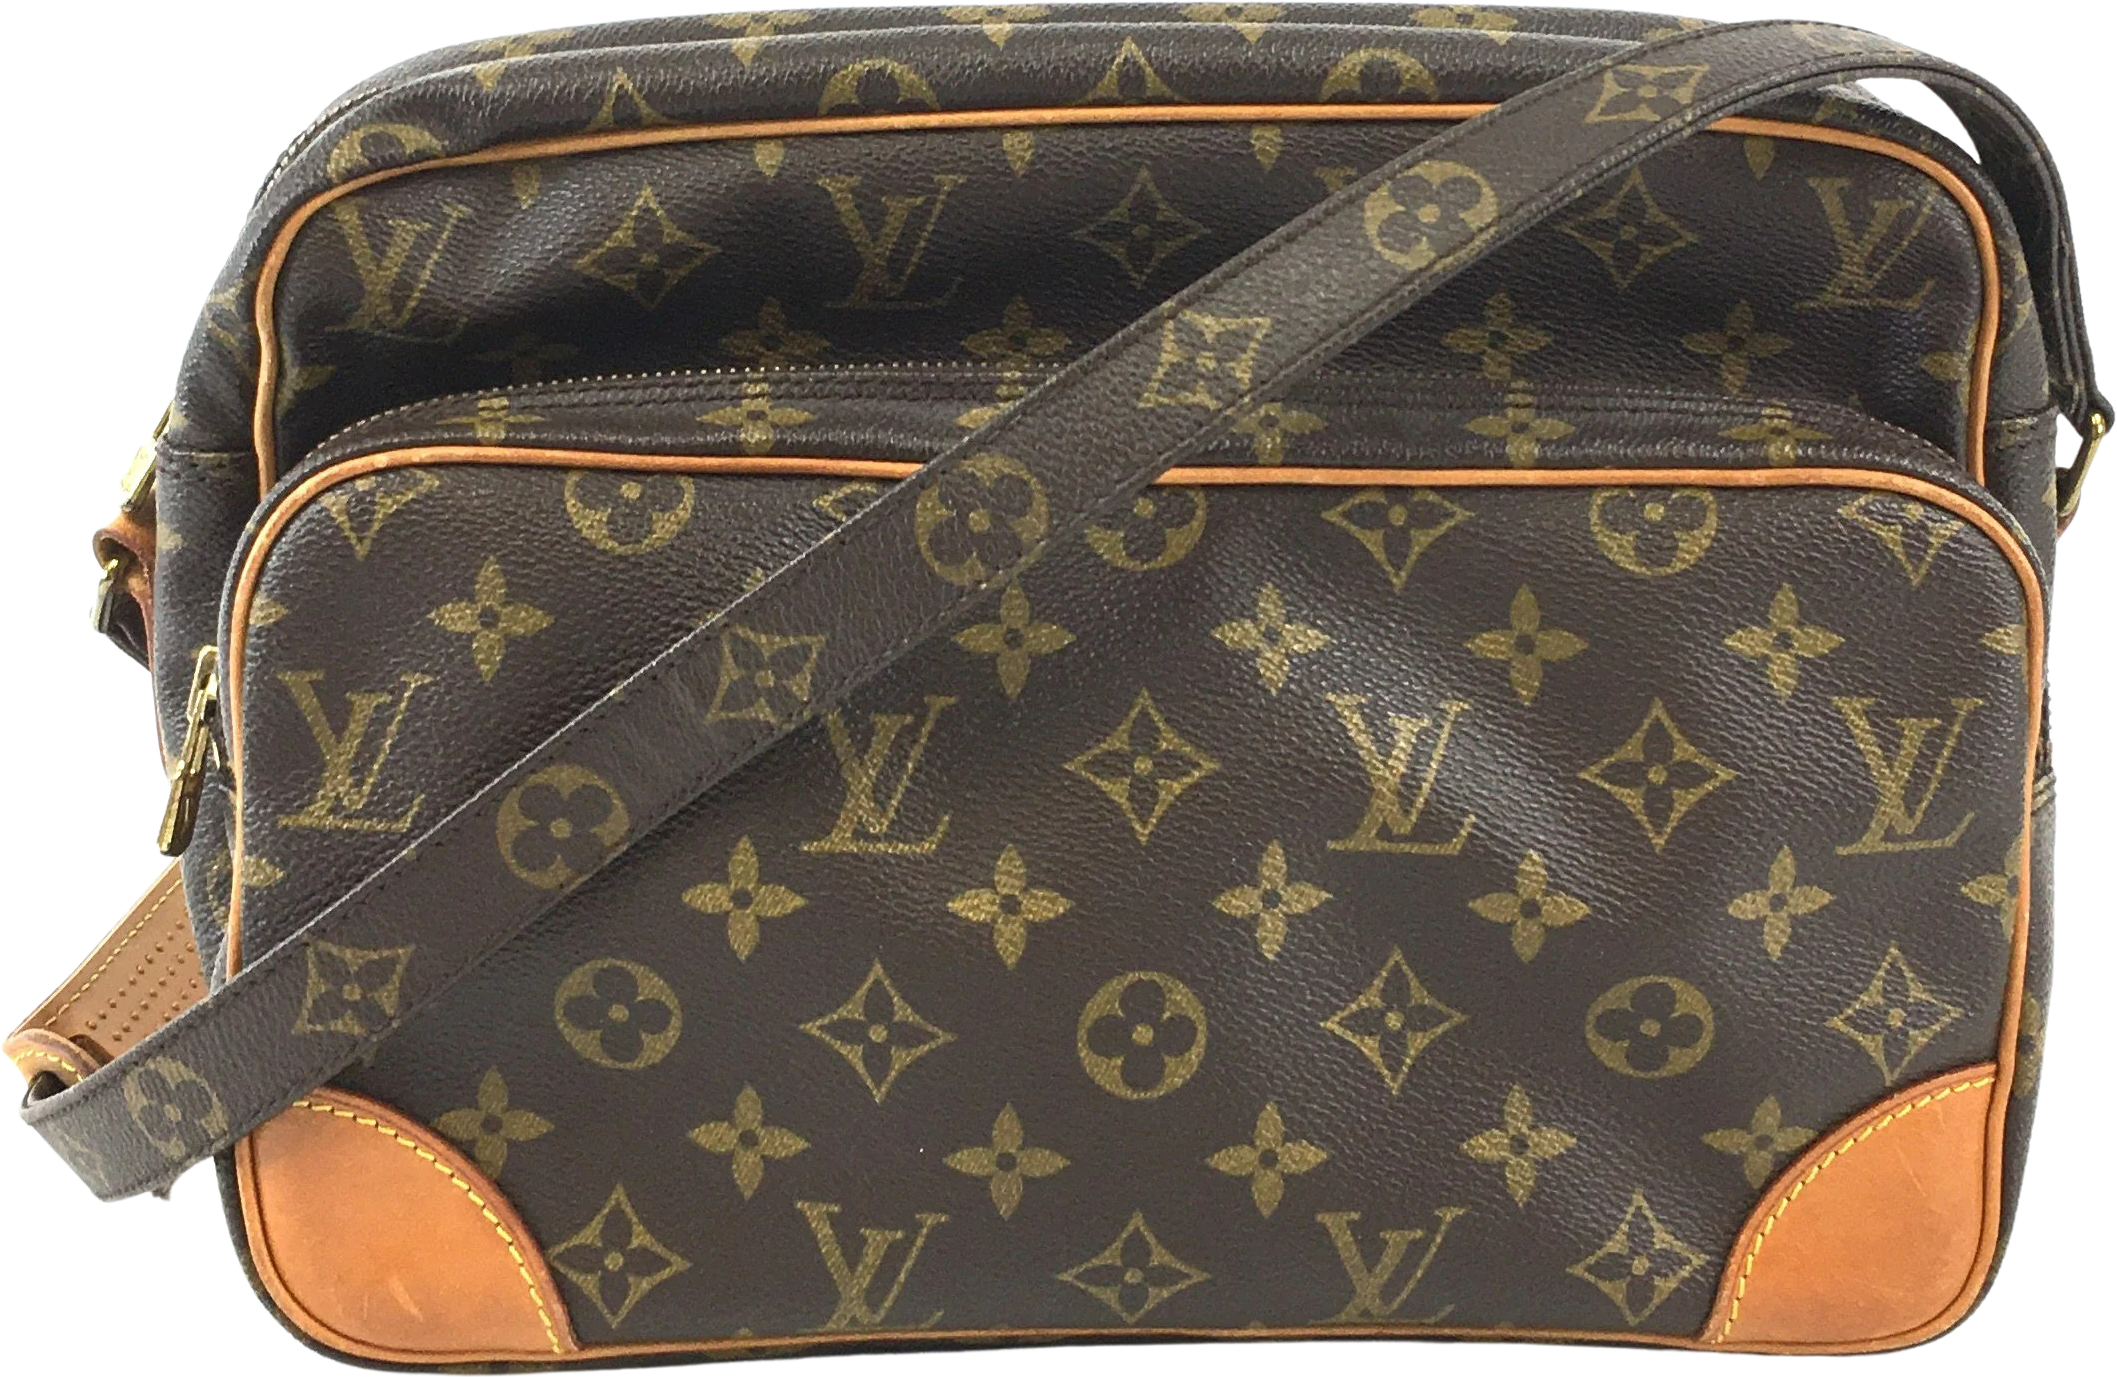 LOUIS VUITTON vintage double bag in brown monogram canvas and